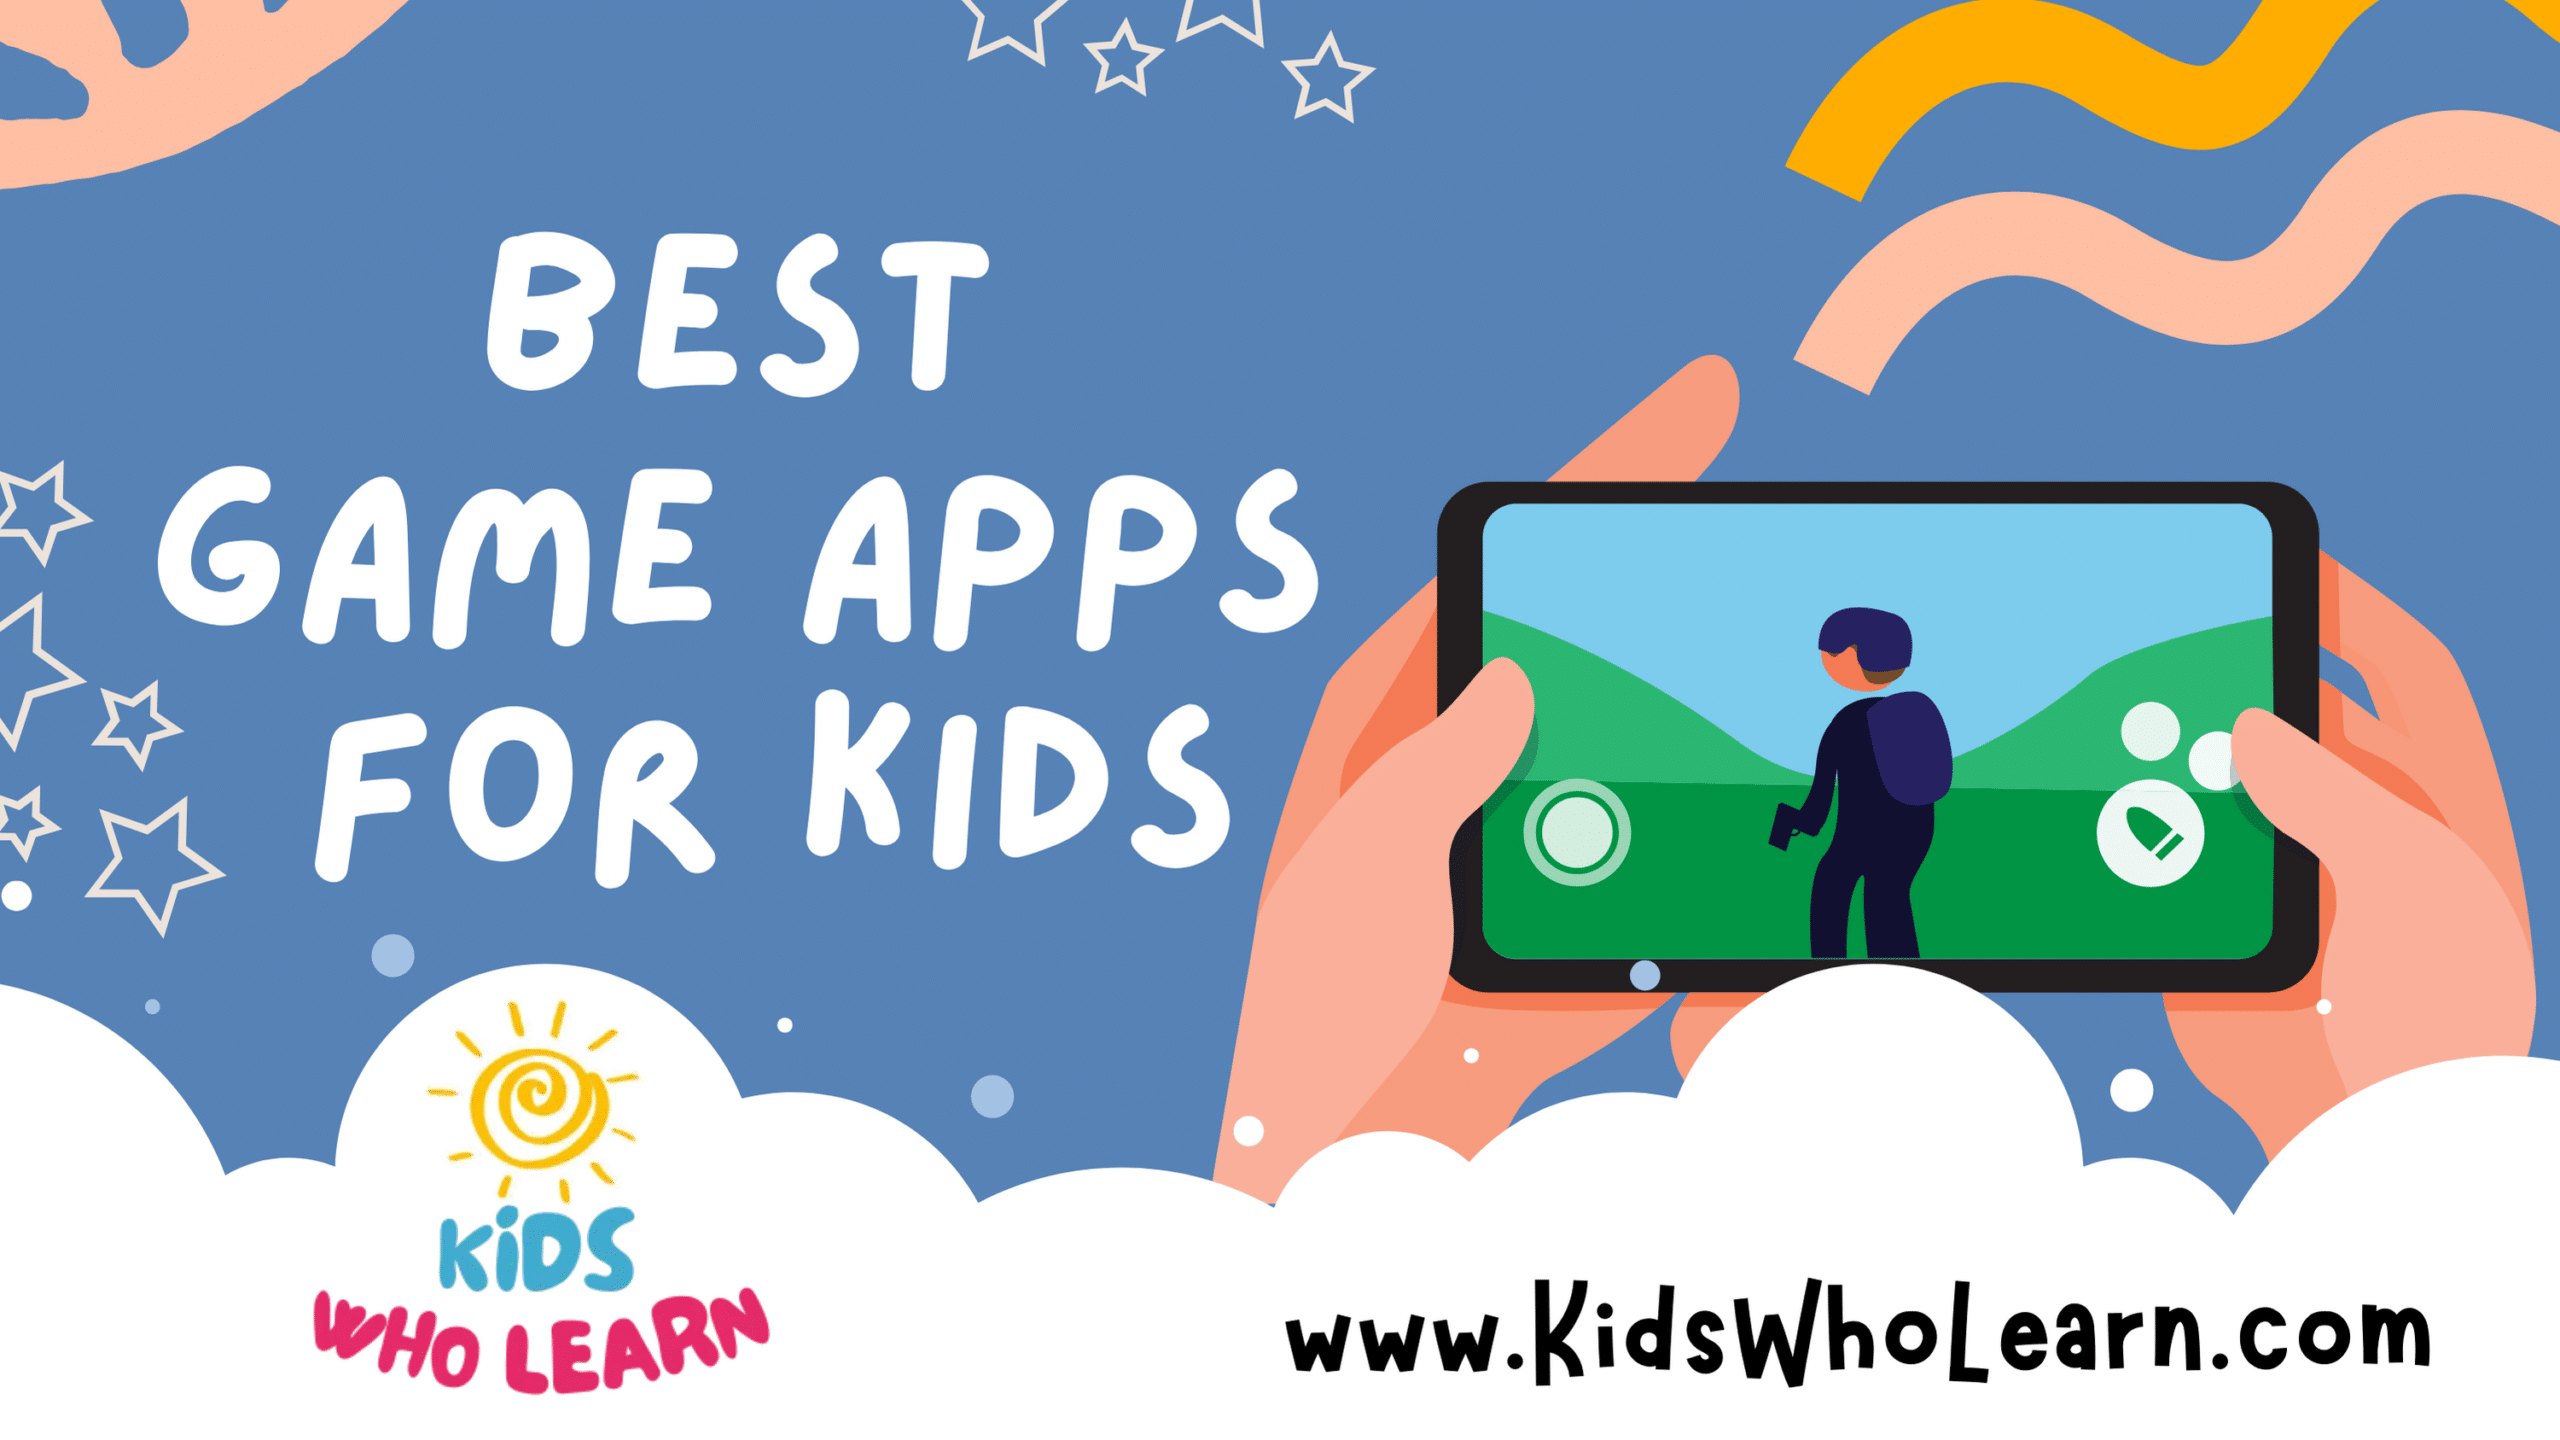 The Best Game Apps for Kids: for Fun and Education